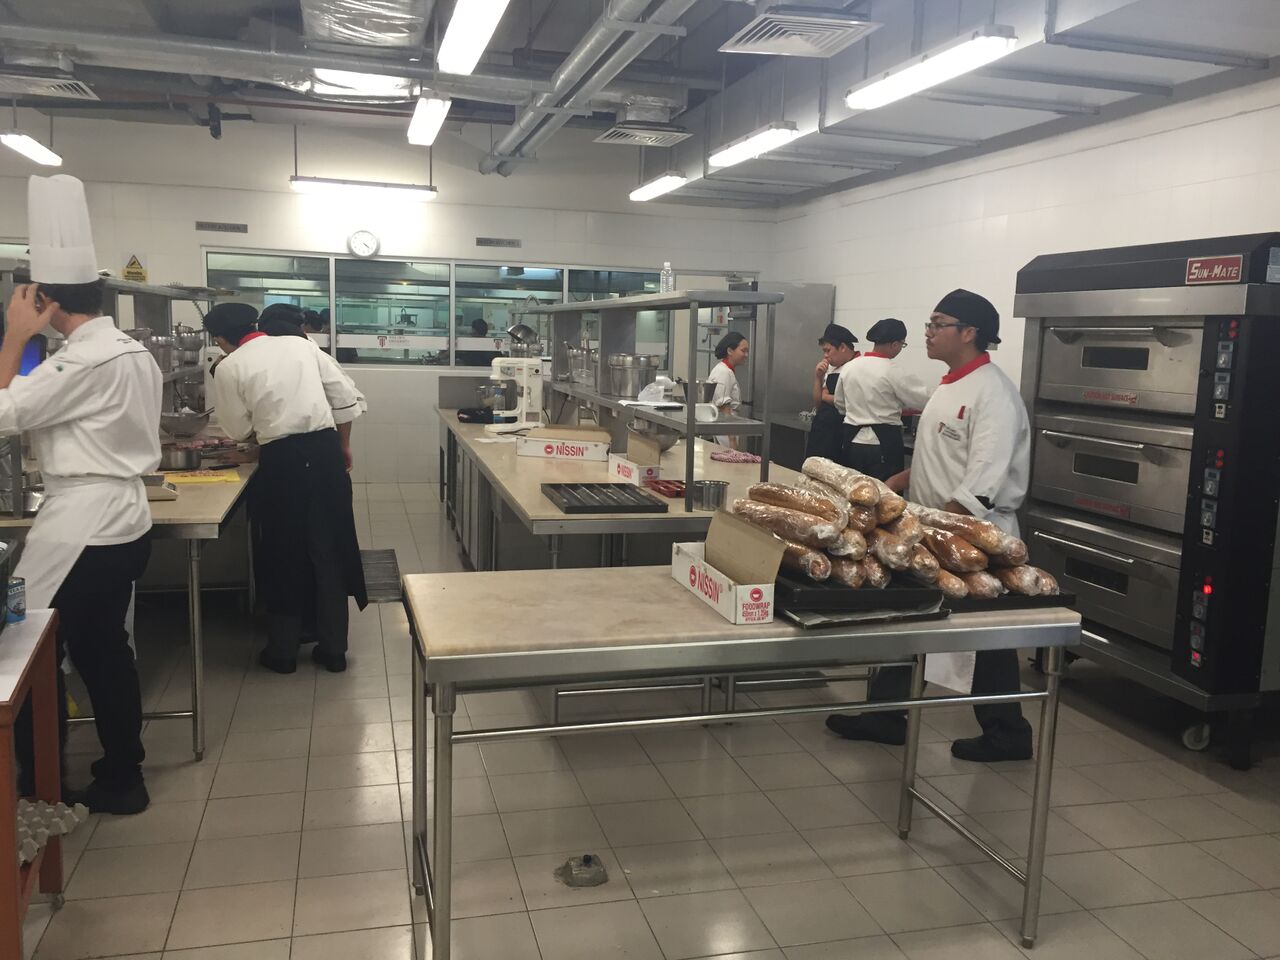 pastry kitchen at Taylor's Uni